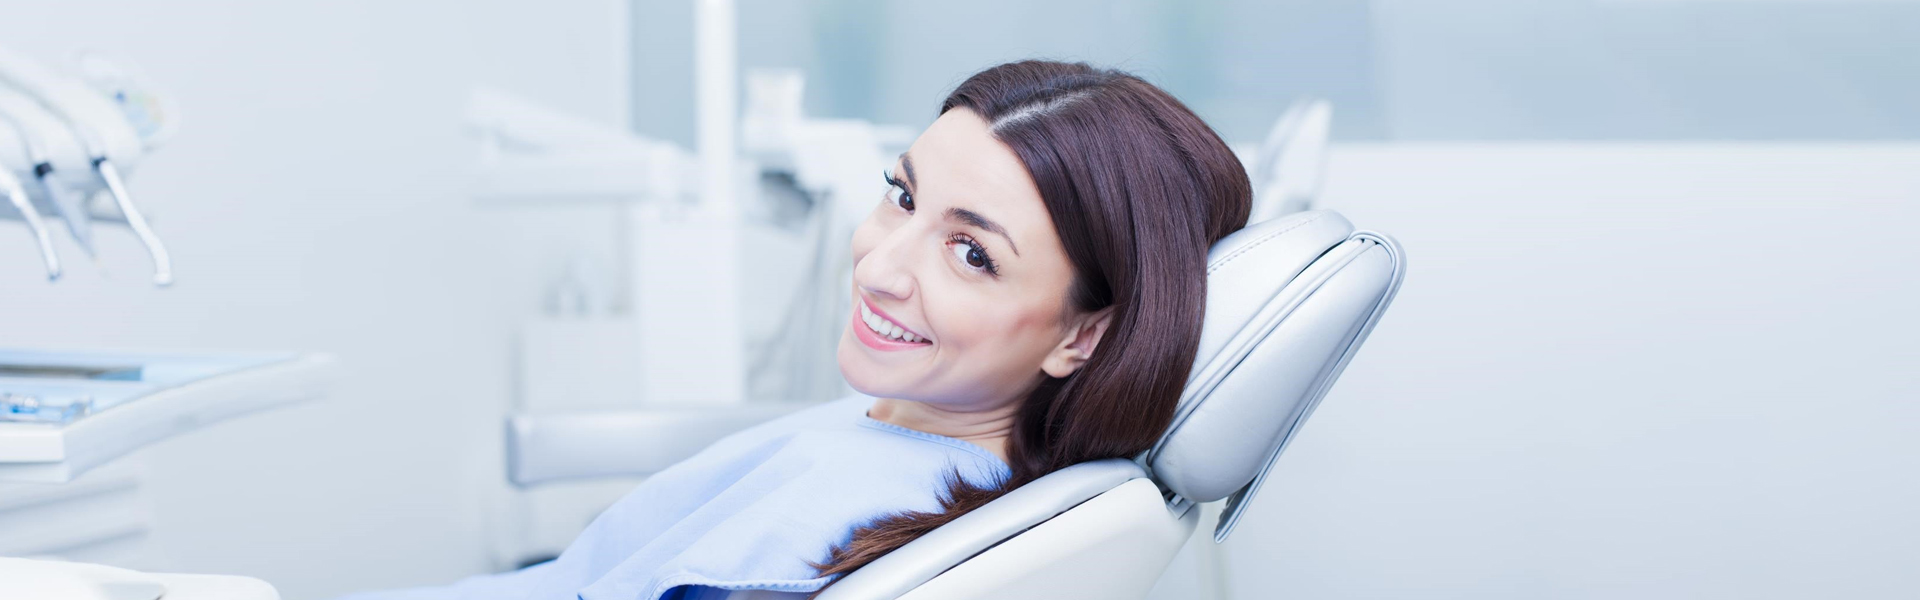 What Is Biofilm and How Does It Affect Your Teeth?